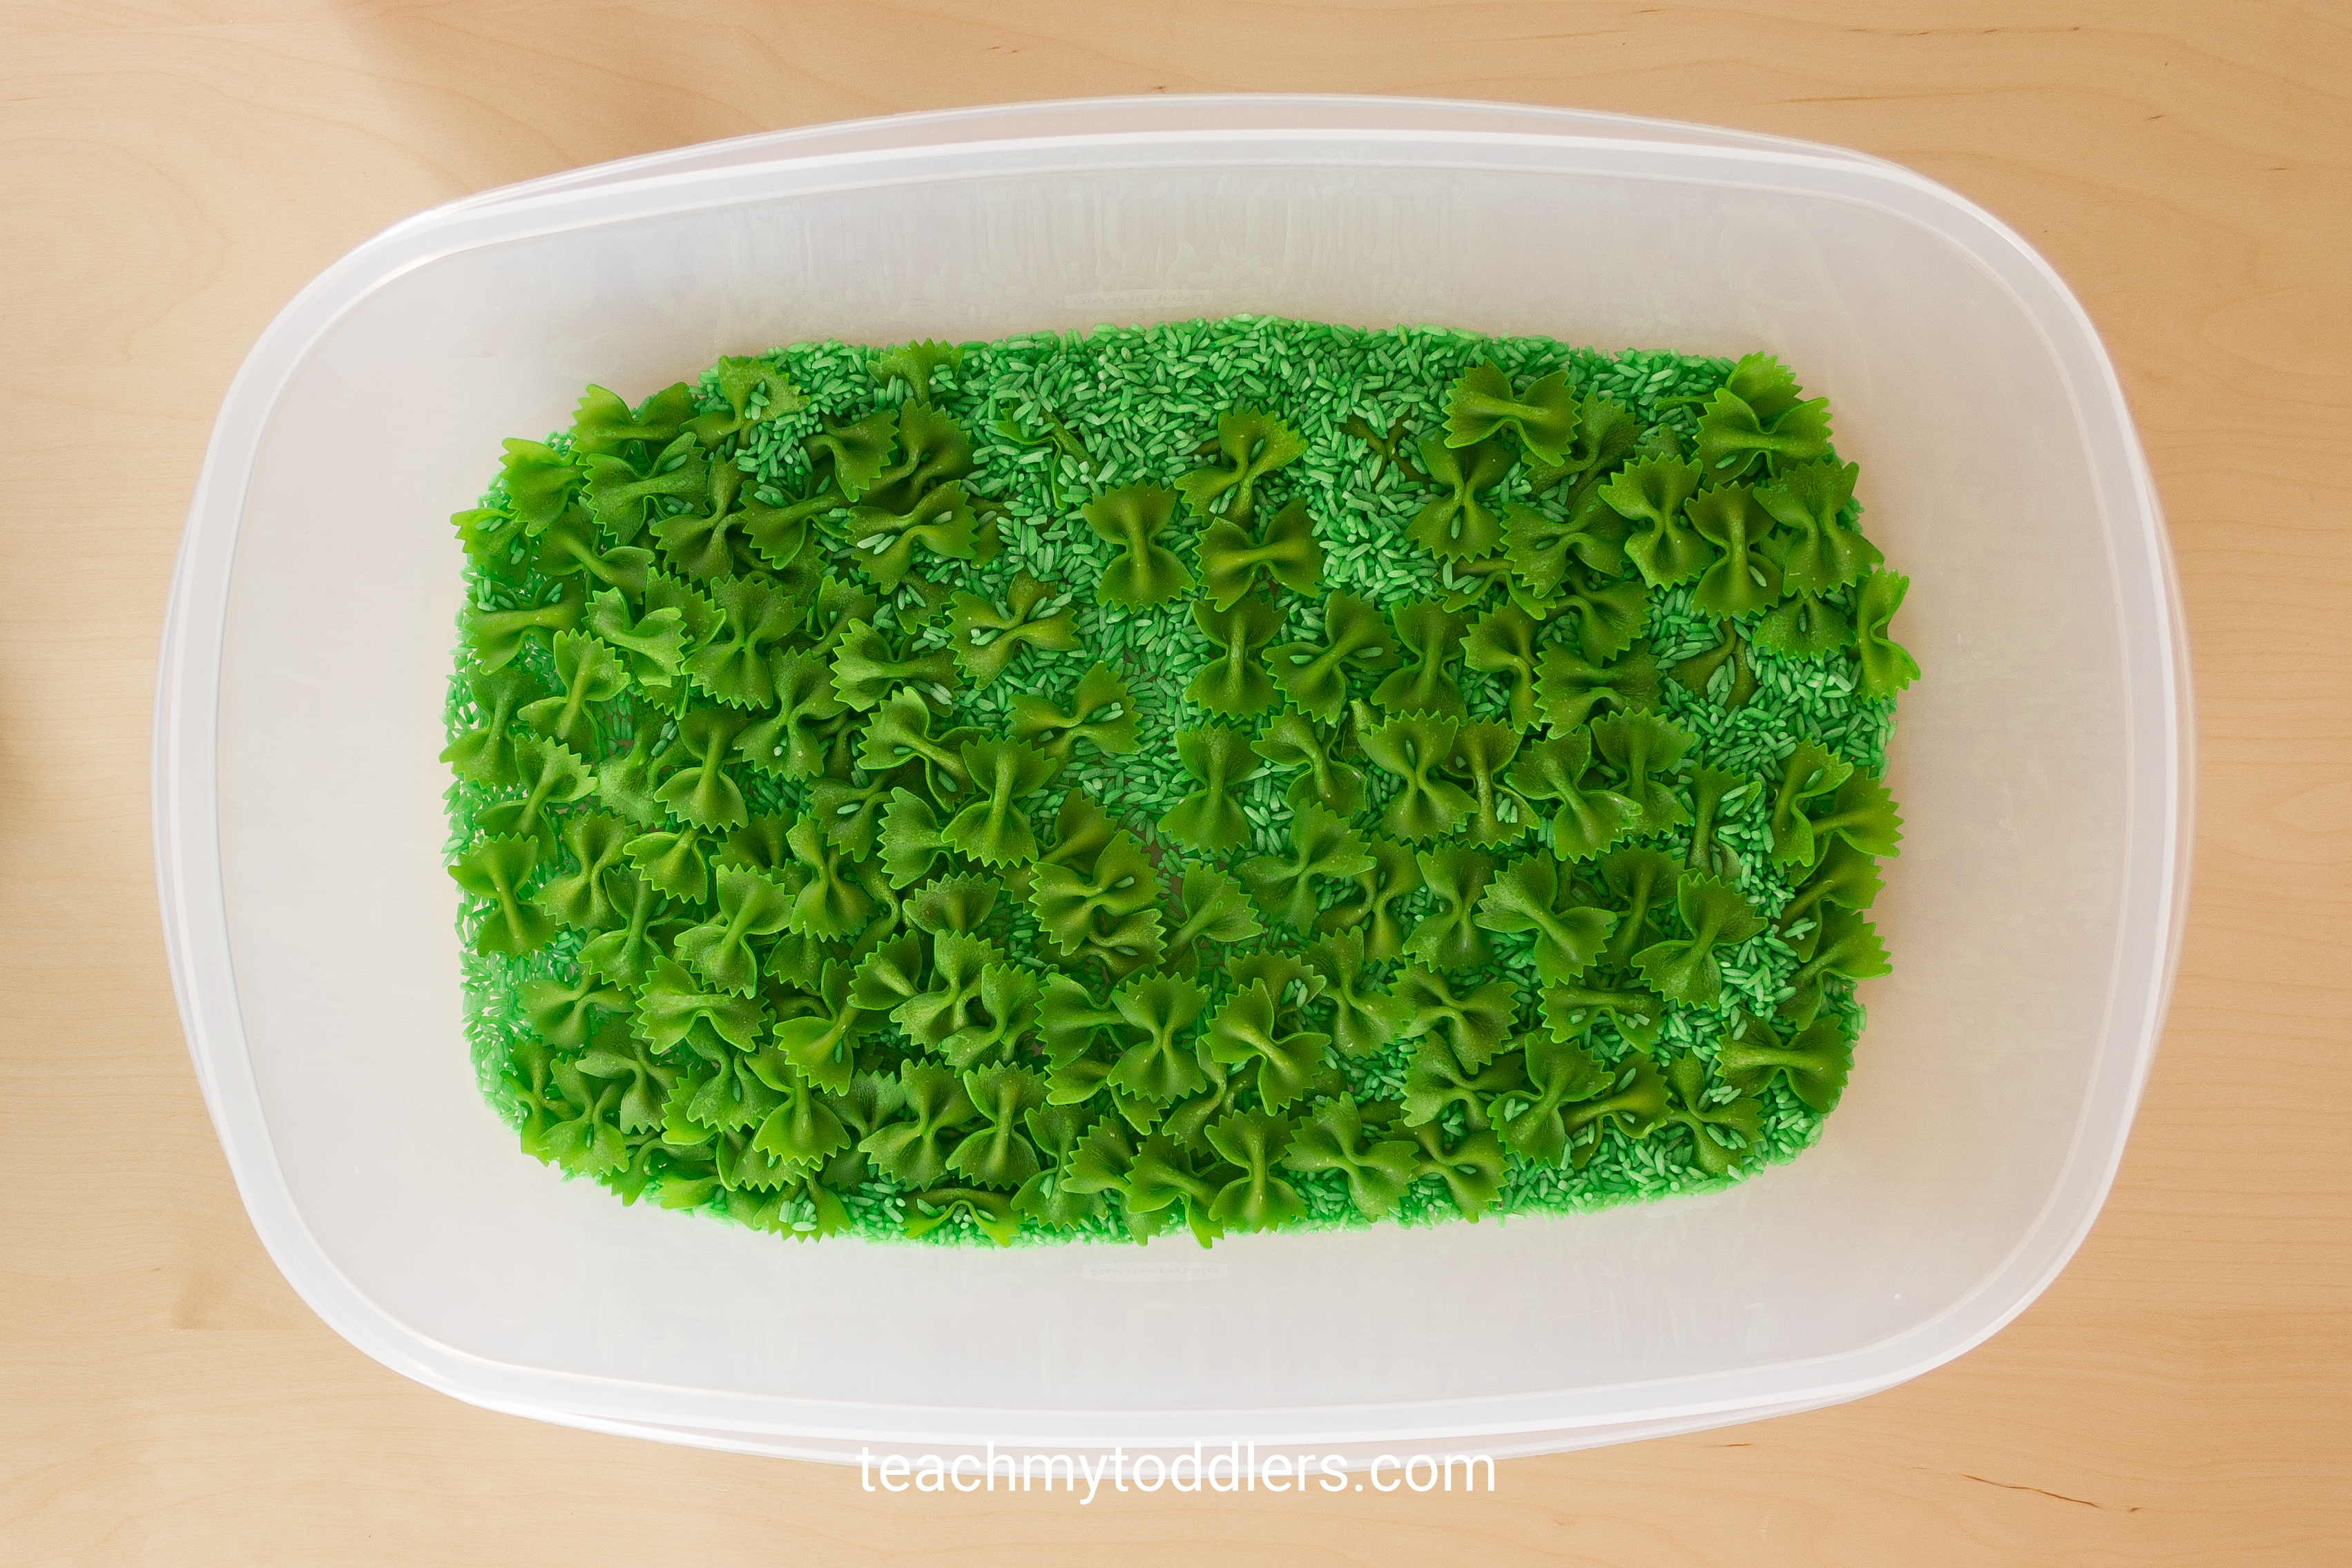 This green sensory bin will help teach your toddlers colors